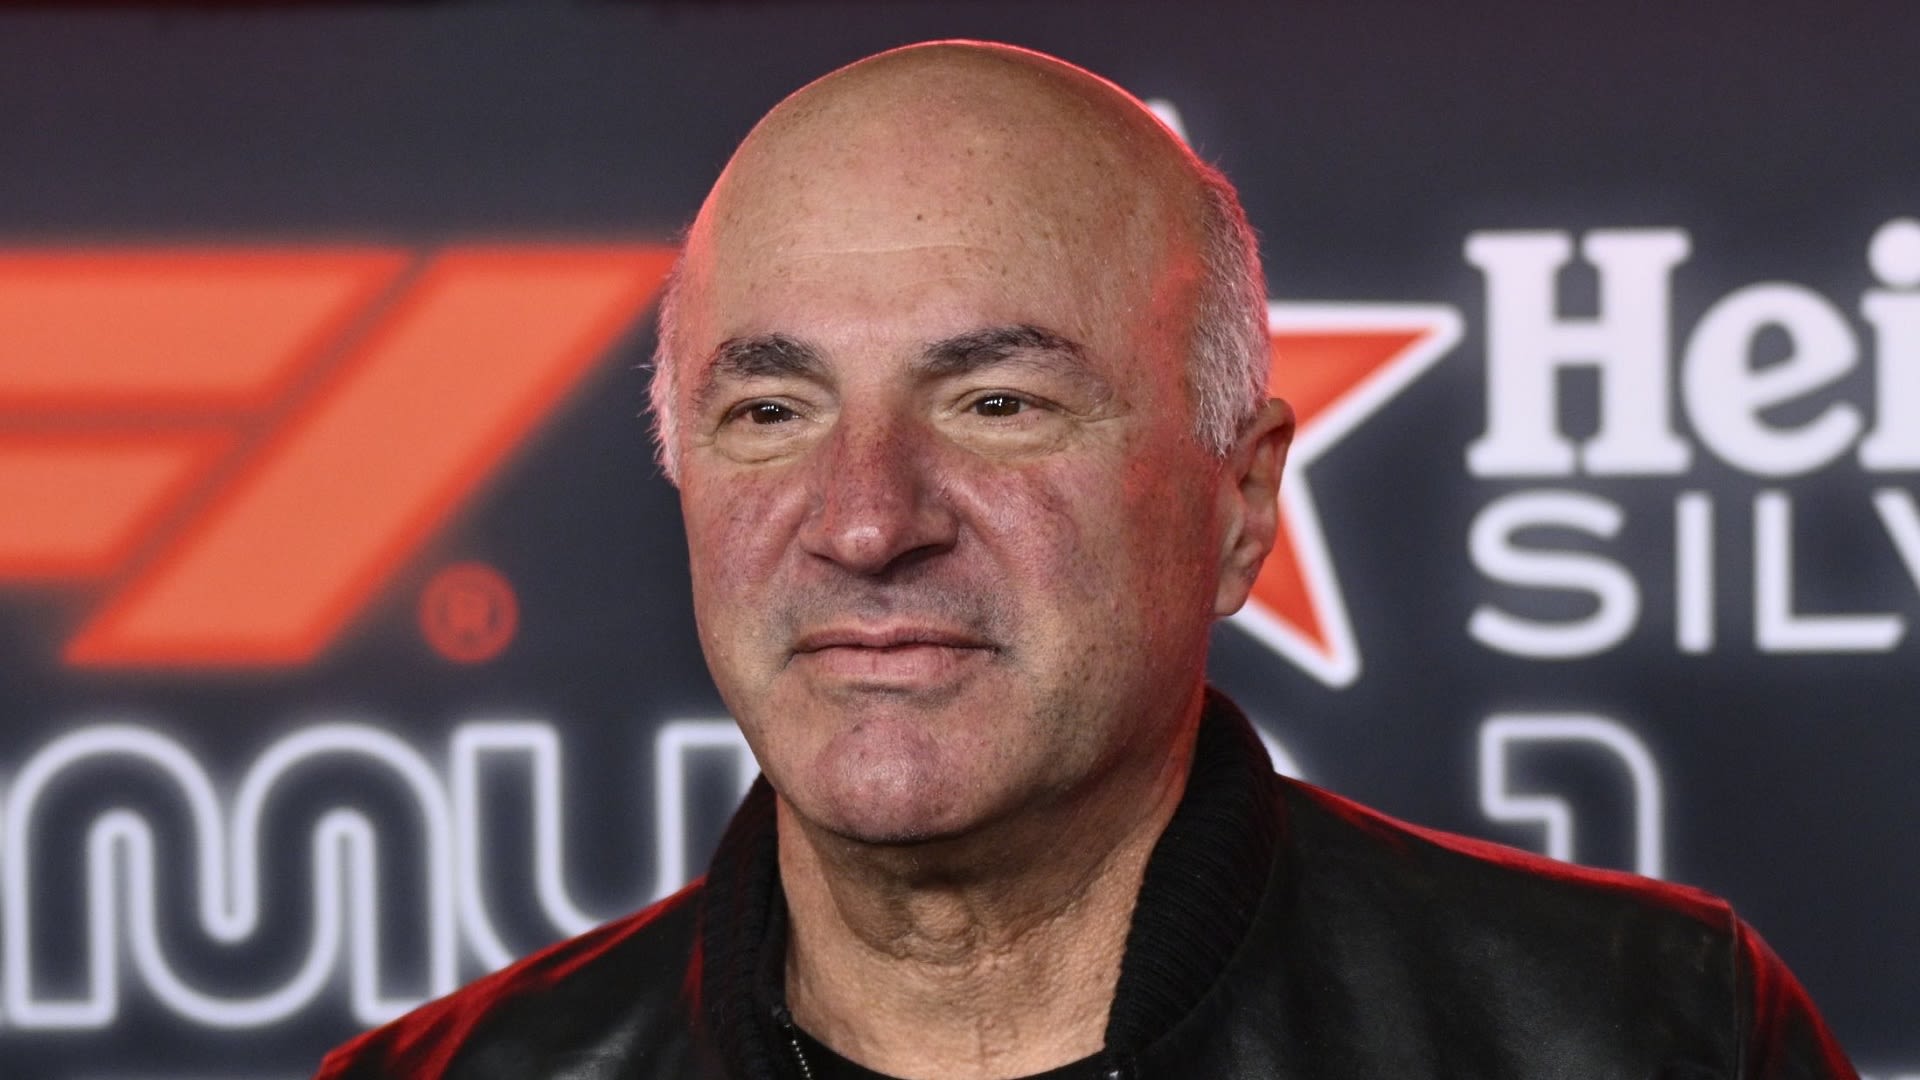 Kevin O’Leary Explains the ‘Hidden Tax on the Middle Class’